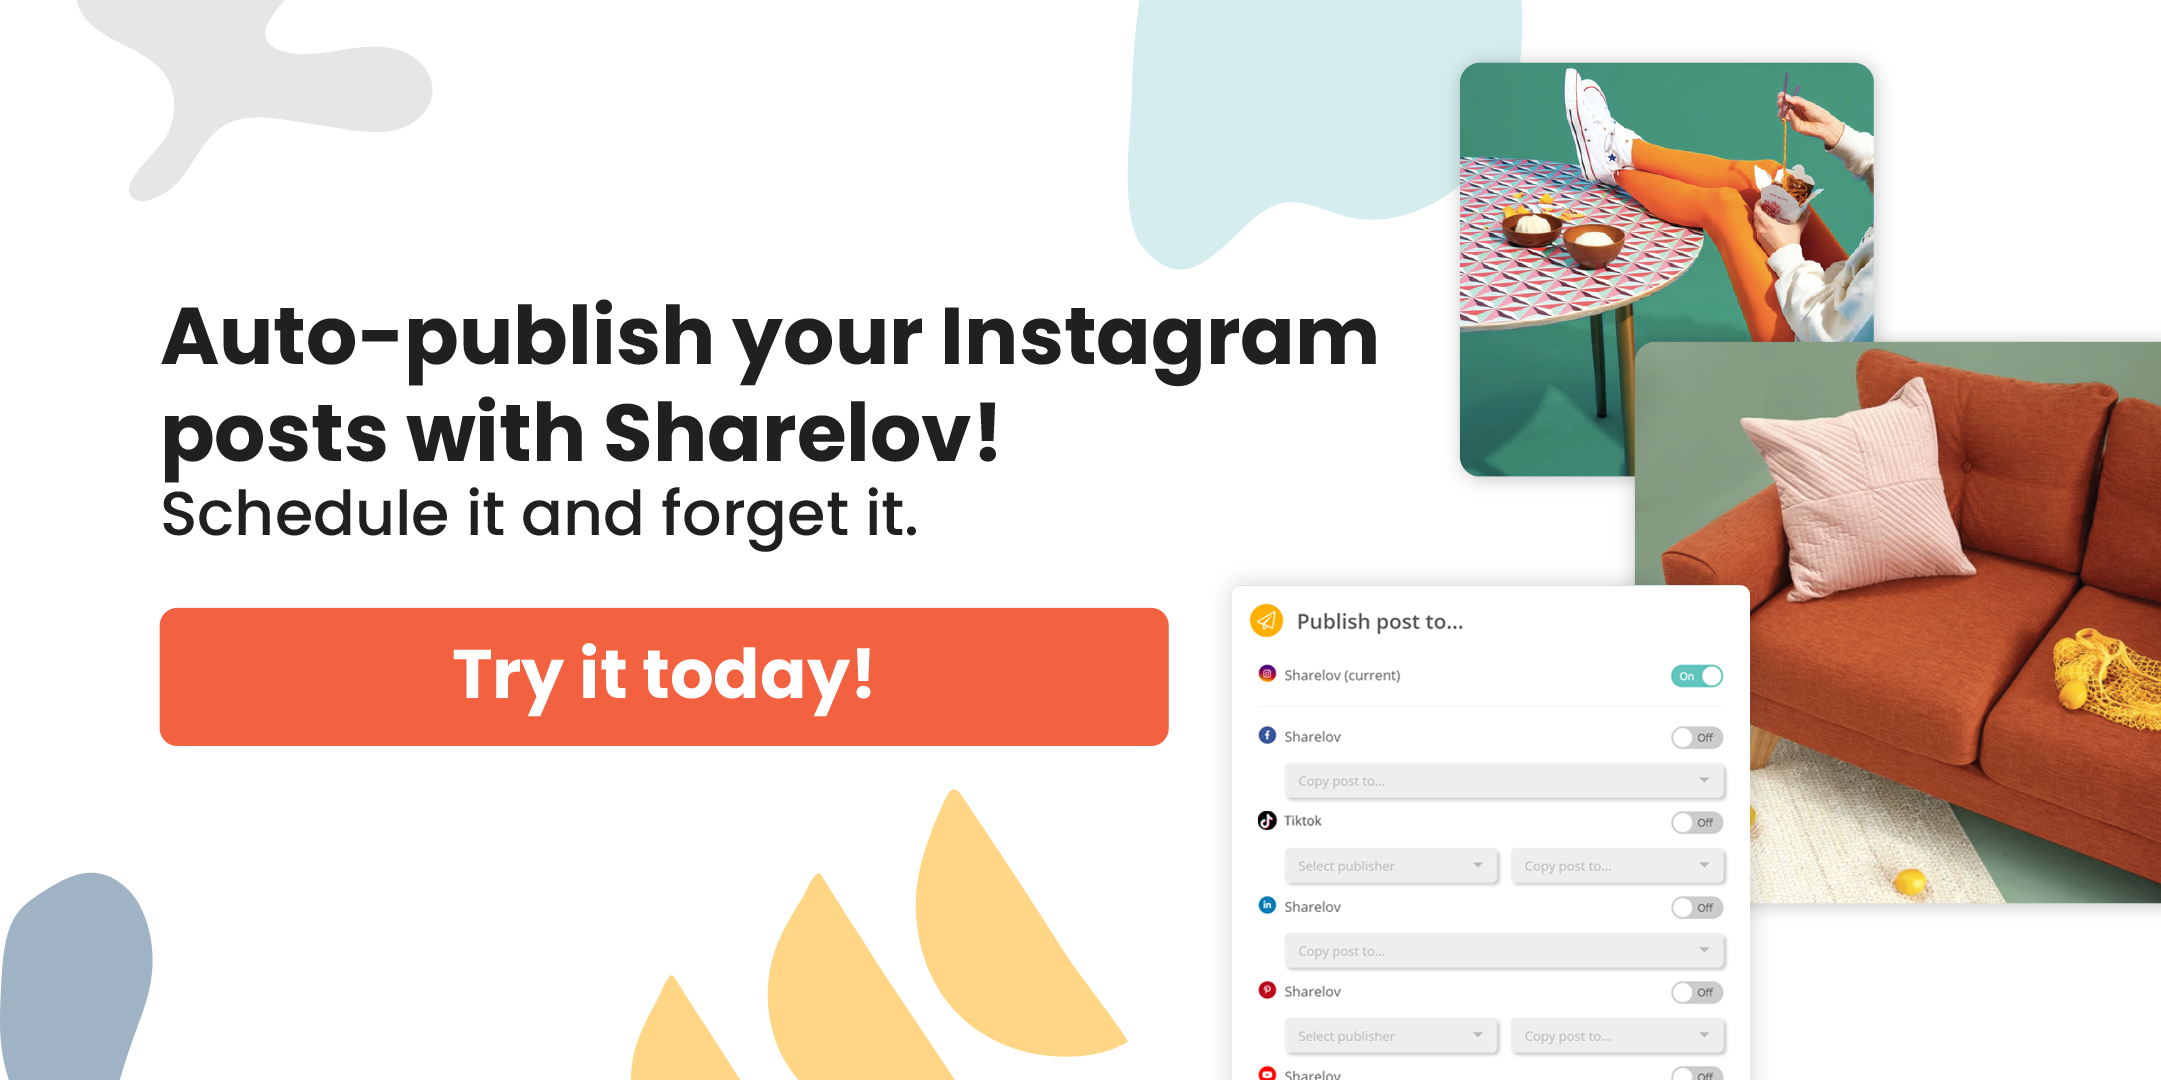 Auto-publish your Instagram posts with Sharelov!